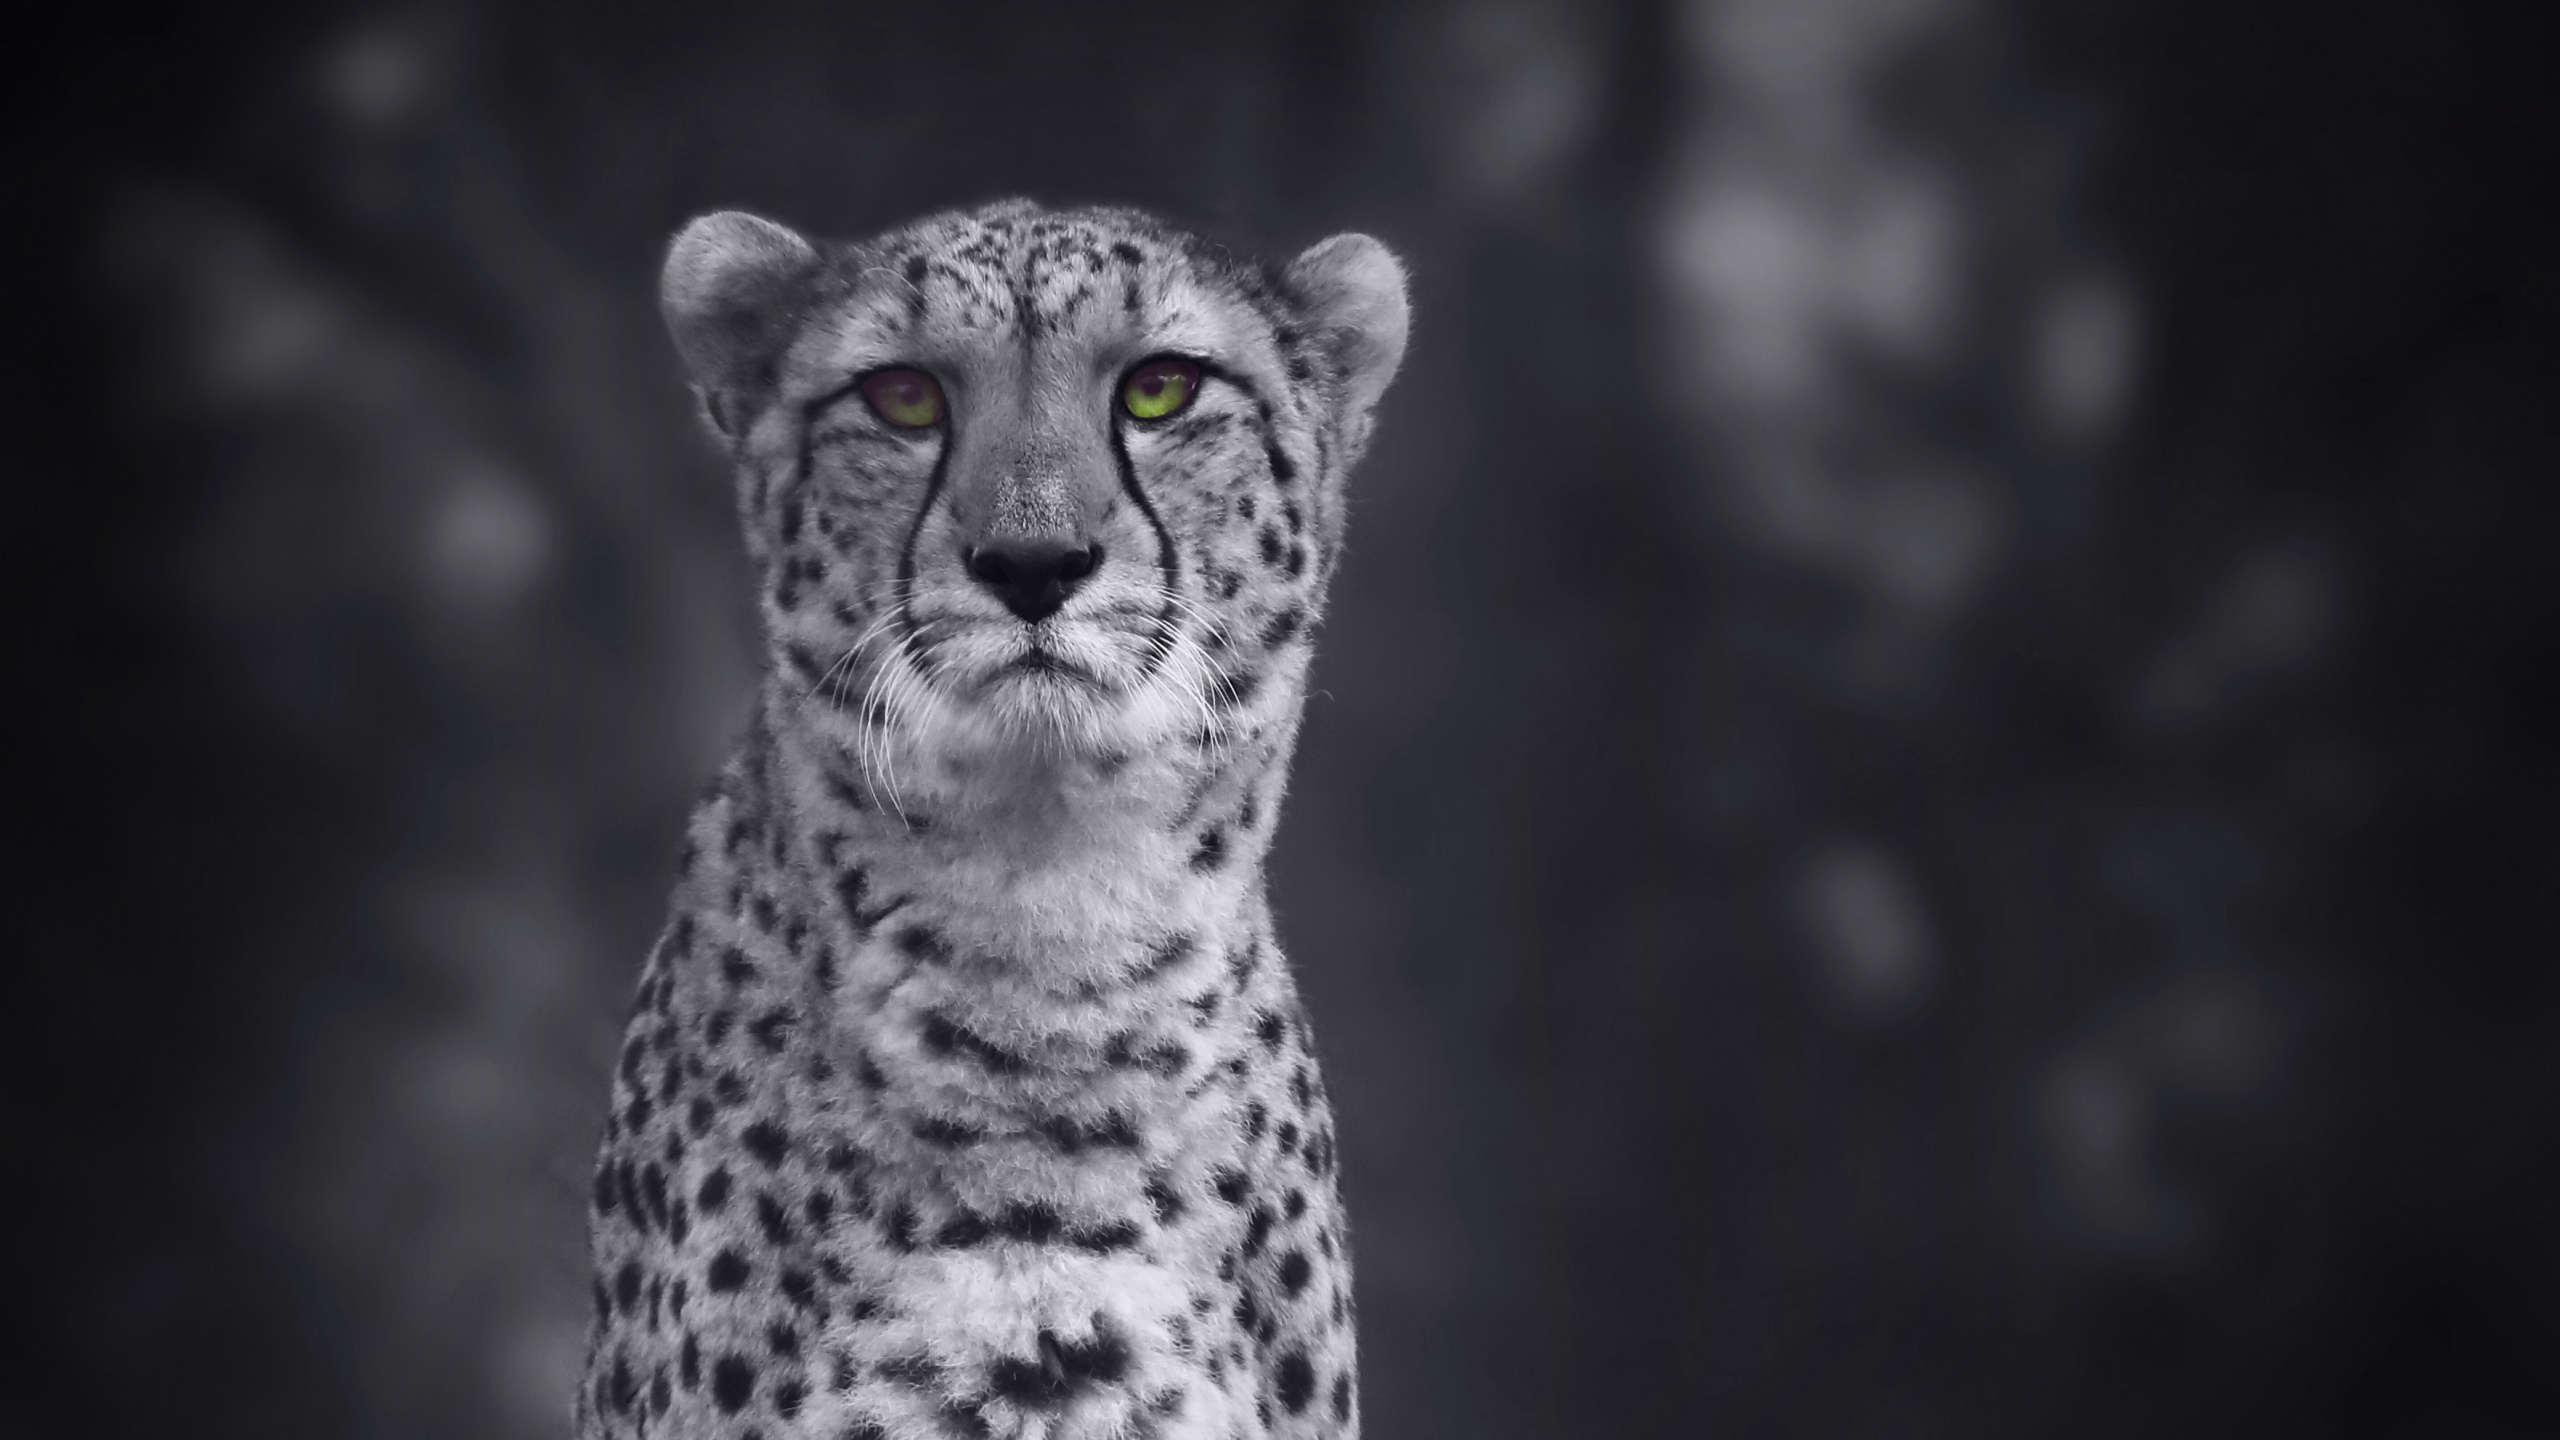 Grayscale Photo of Cheetah on Grass. Wallpaper in 2560x1440 Resolution